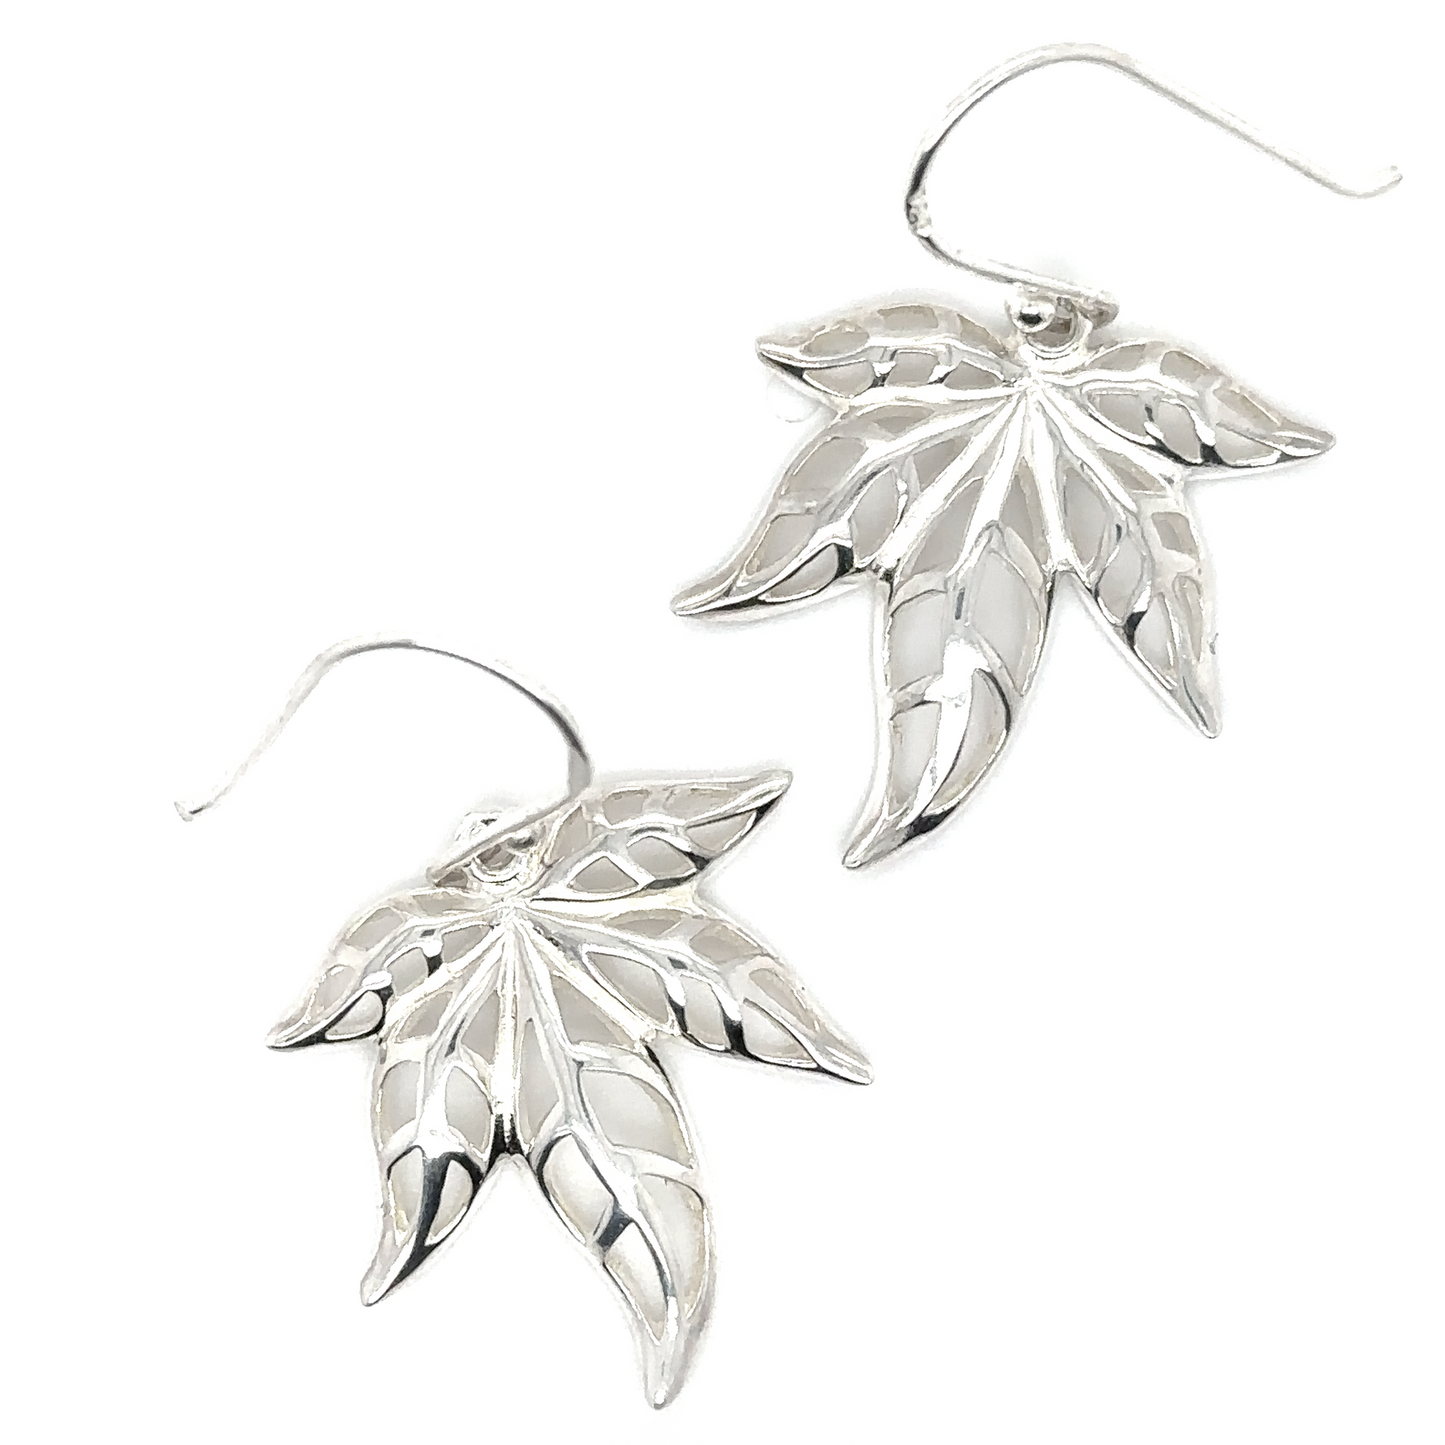 A pair of Super Silver Silver Maple Leaves Dangle Earrings on a white background.